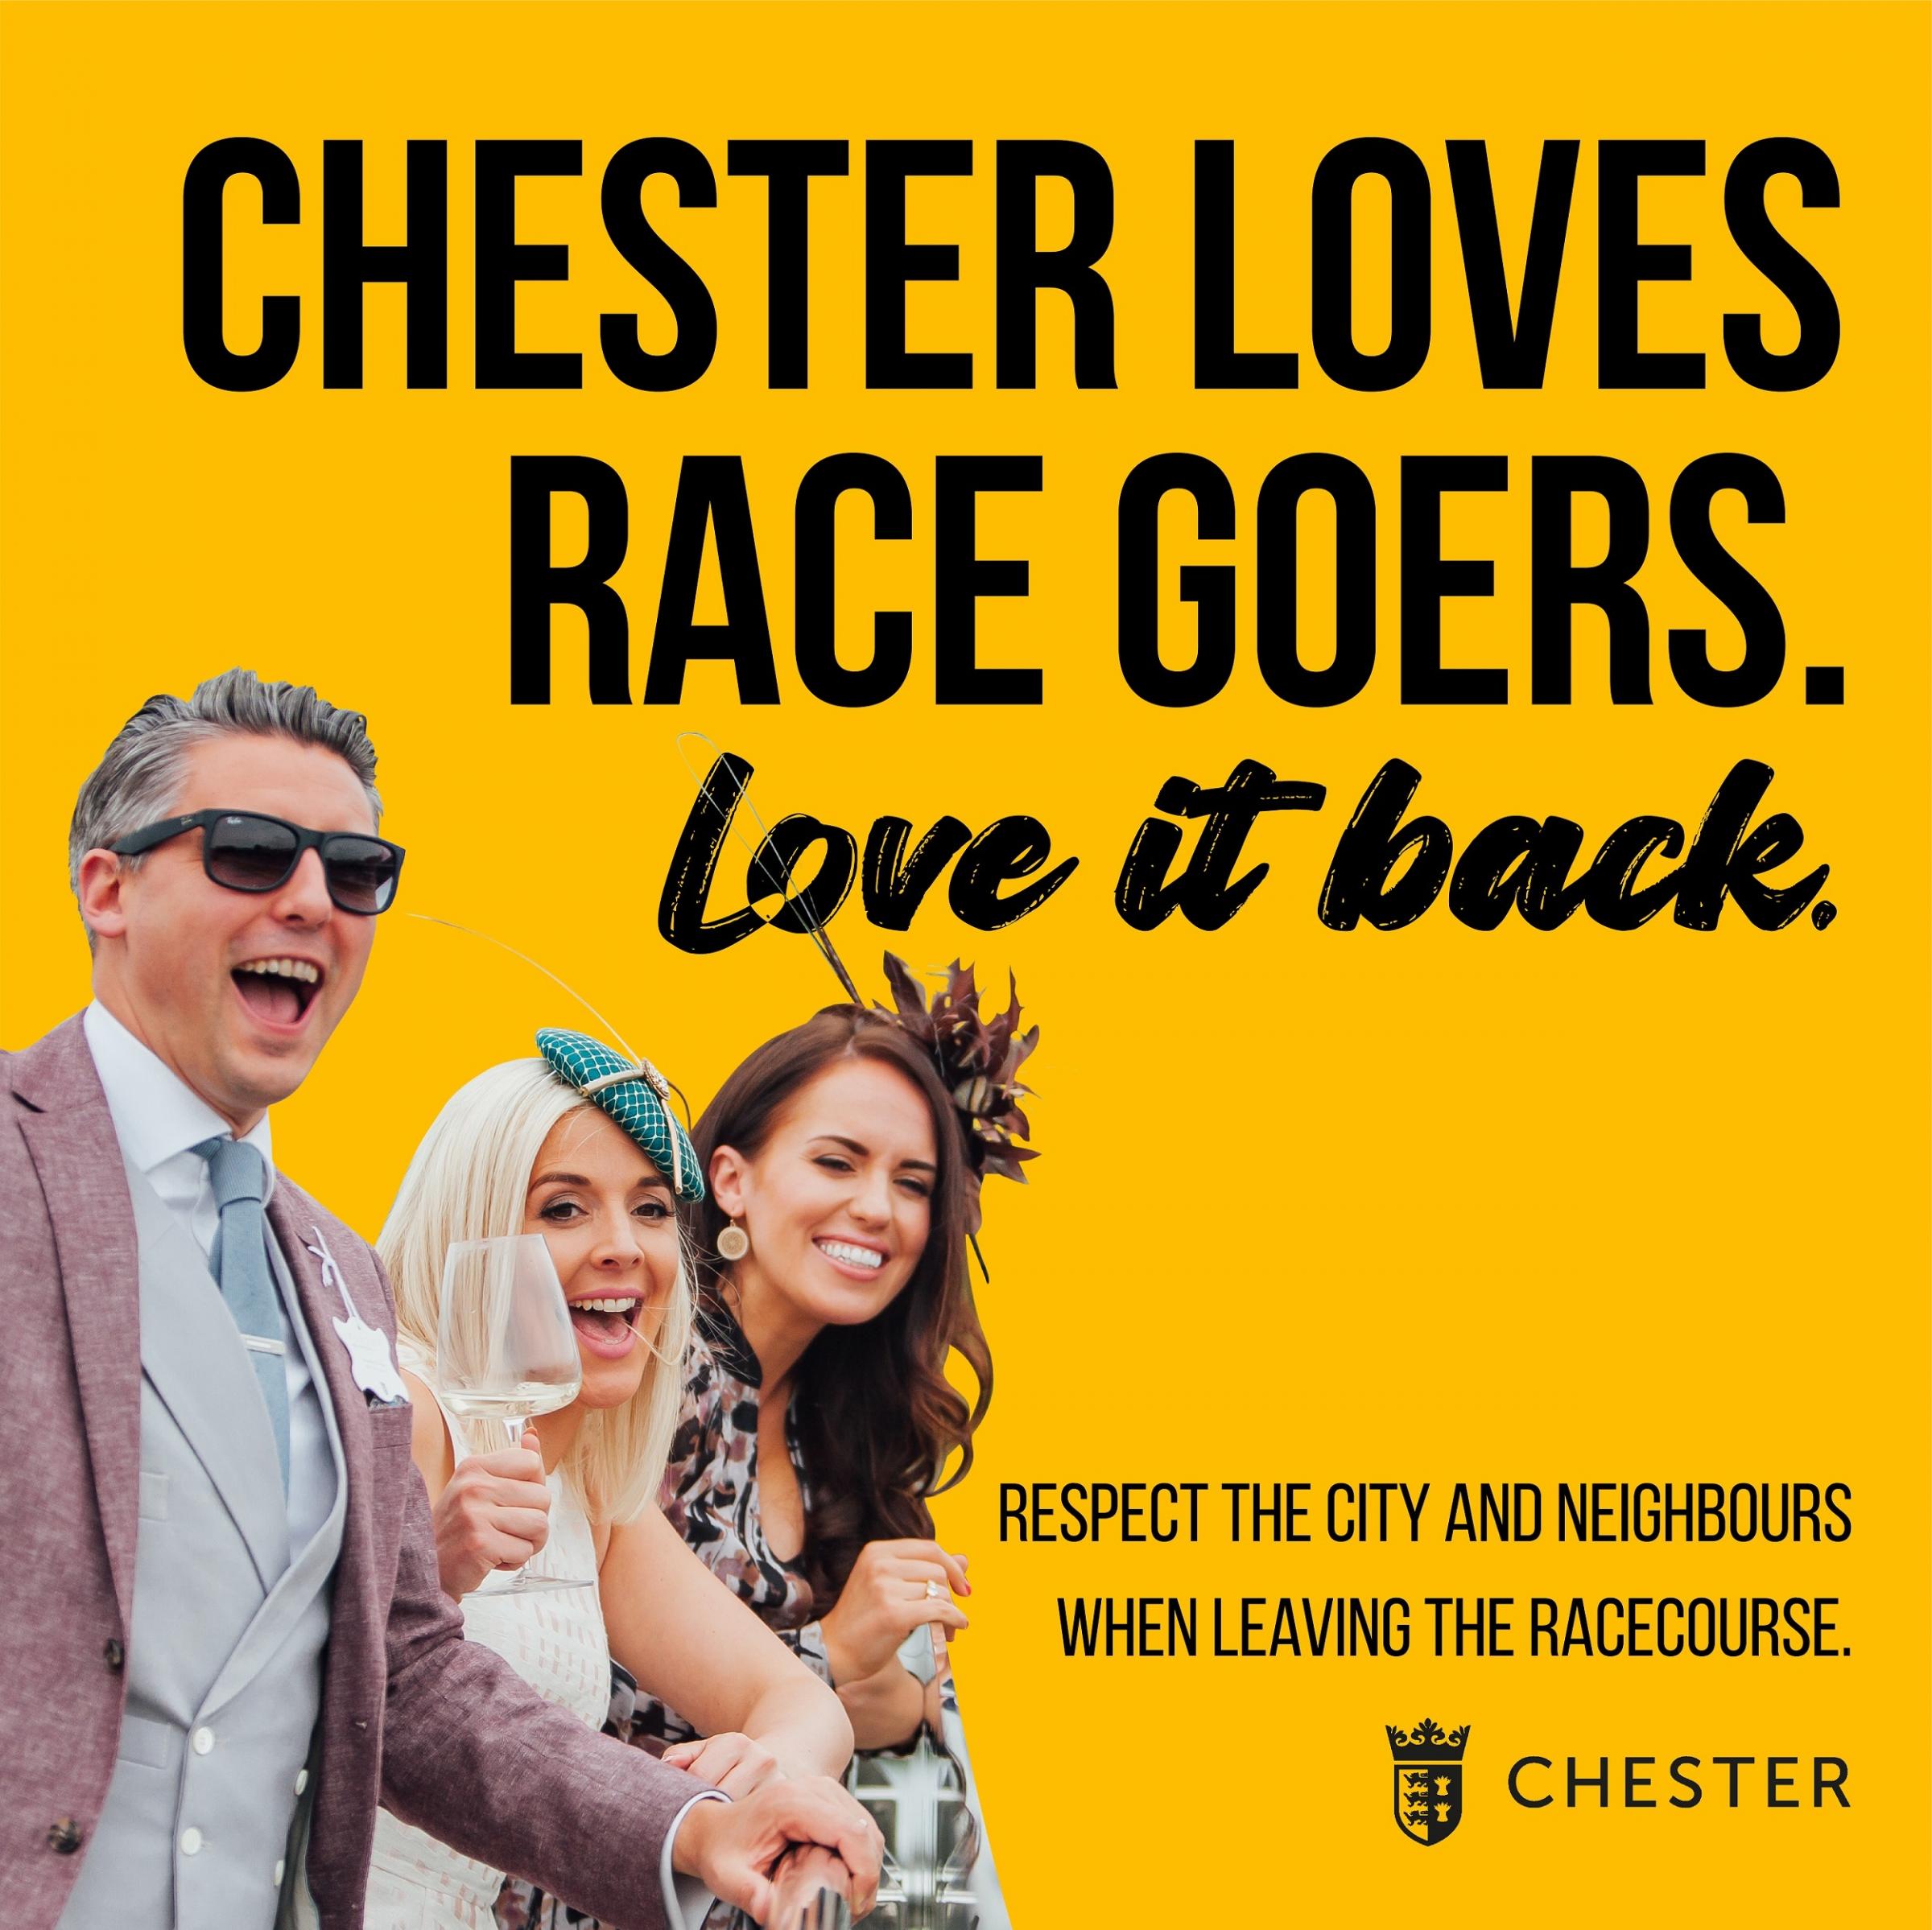 The Chester Loves Race Goers campaign will come into effect at this years May Festival.